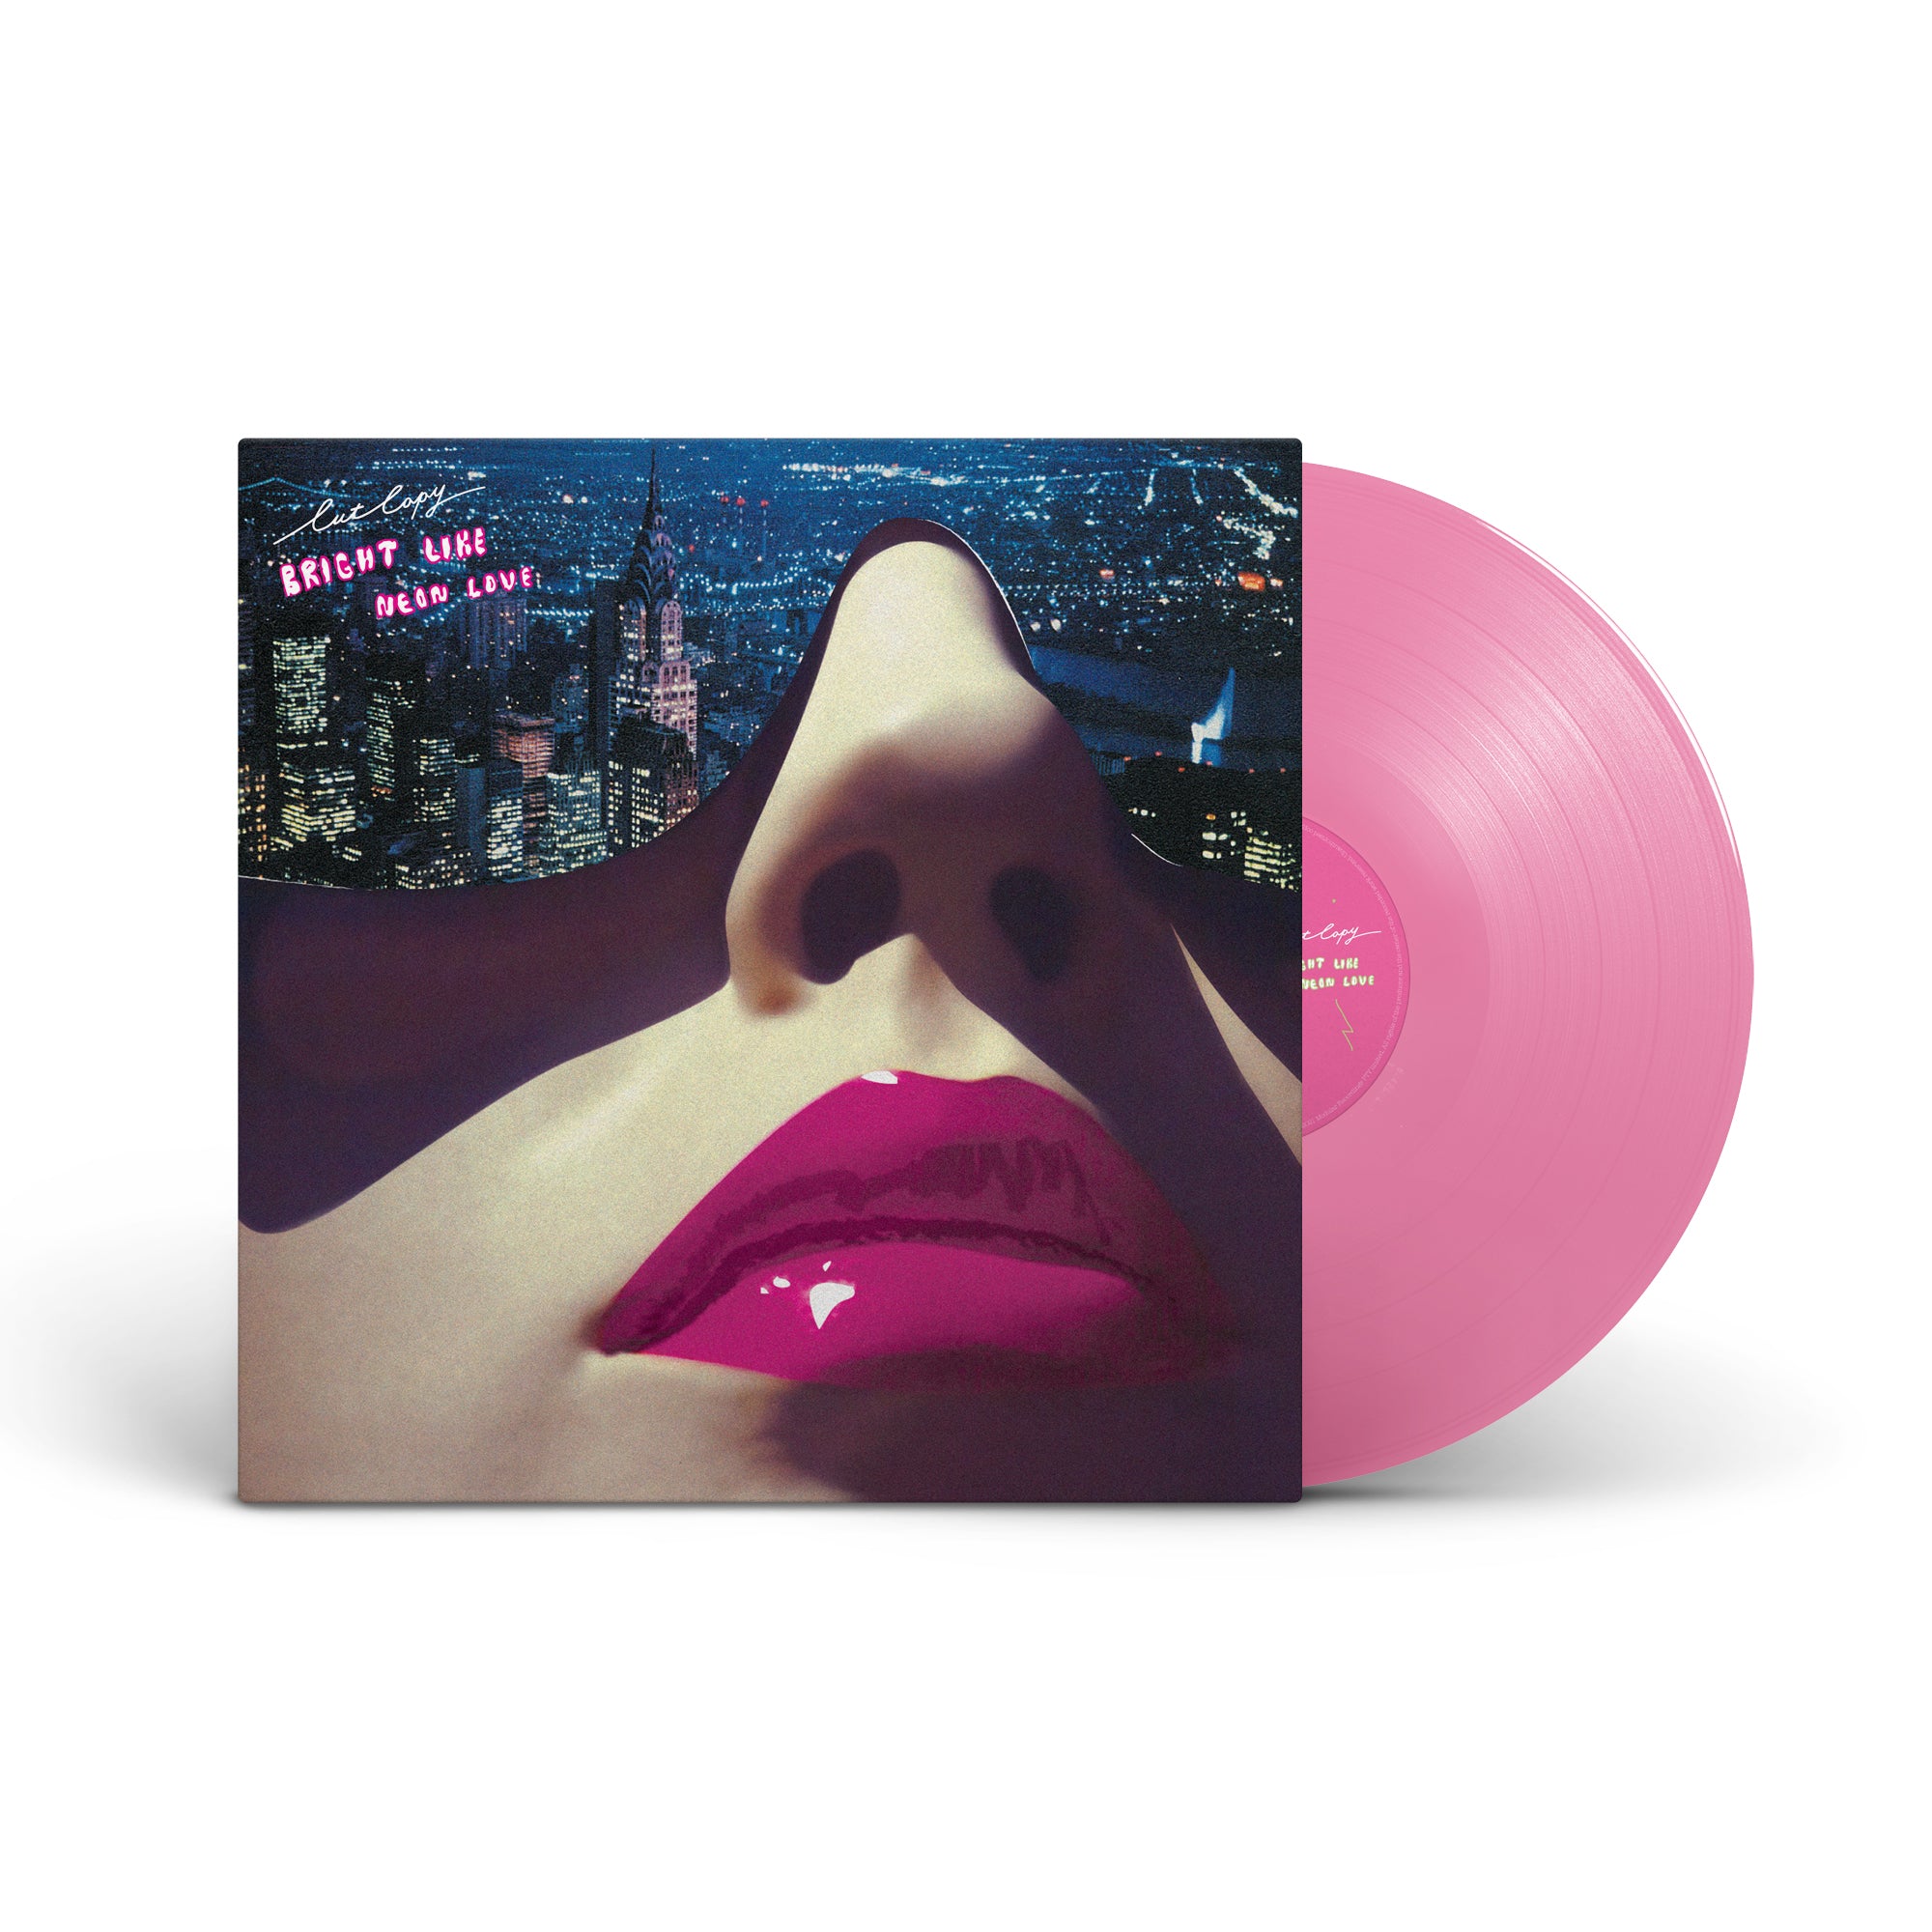 Cut Copy - Bright Like Neon Love (Limited Edition Pink Coloured Vinyl)